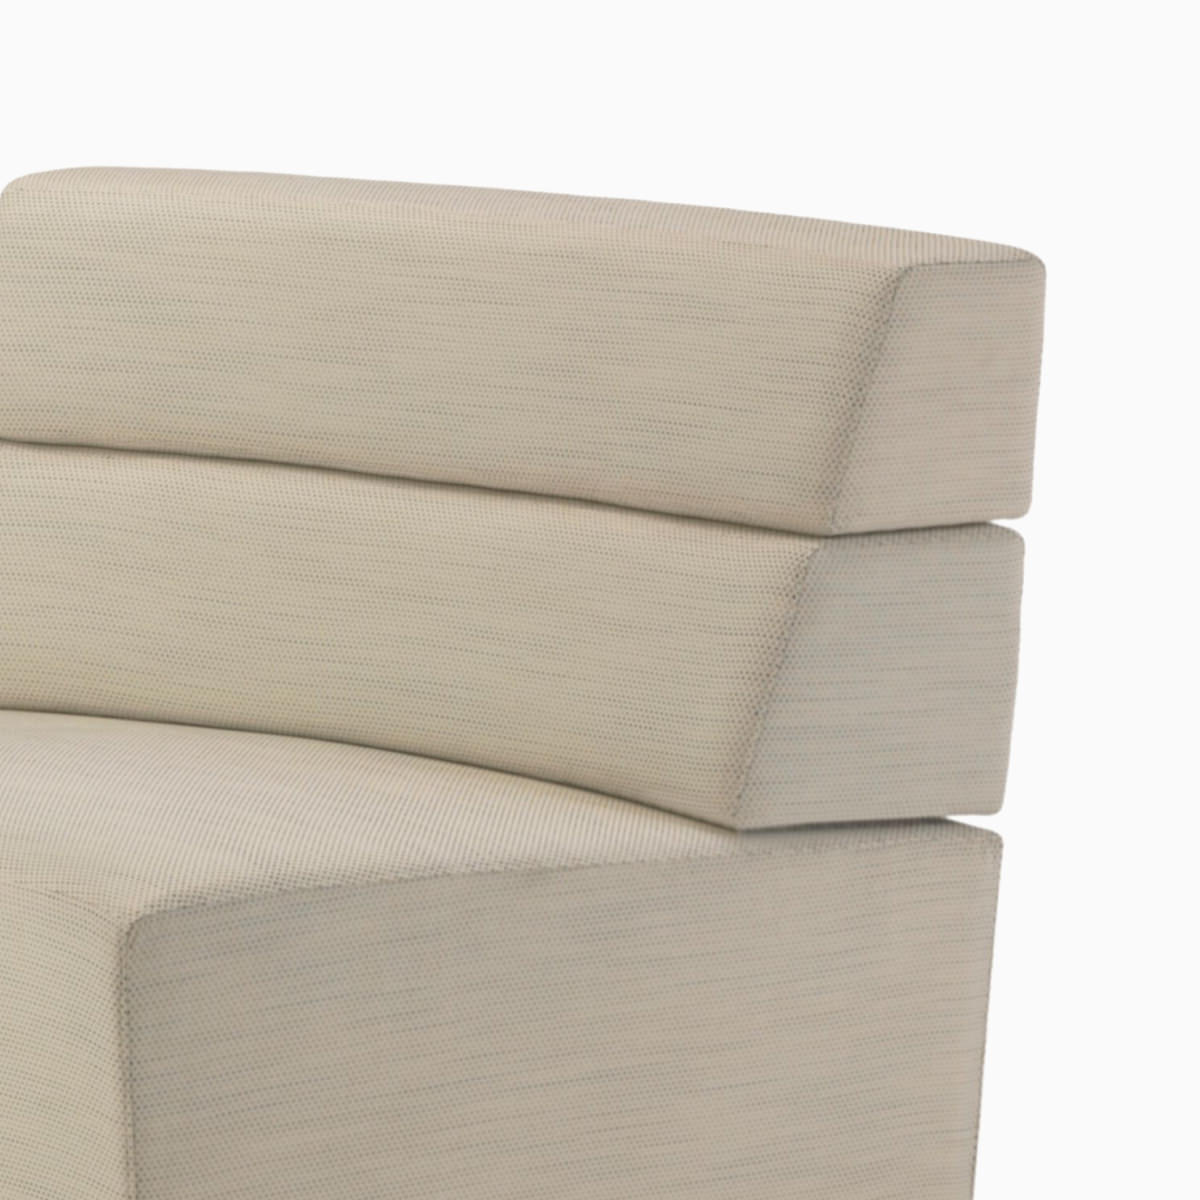 A mid-back inside wedge portion of a Nemschoff Steps Lounge System in a light-colored textile.